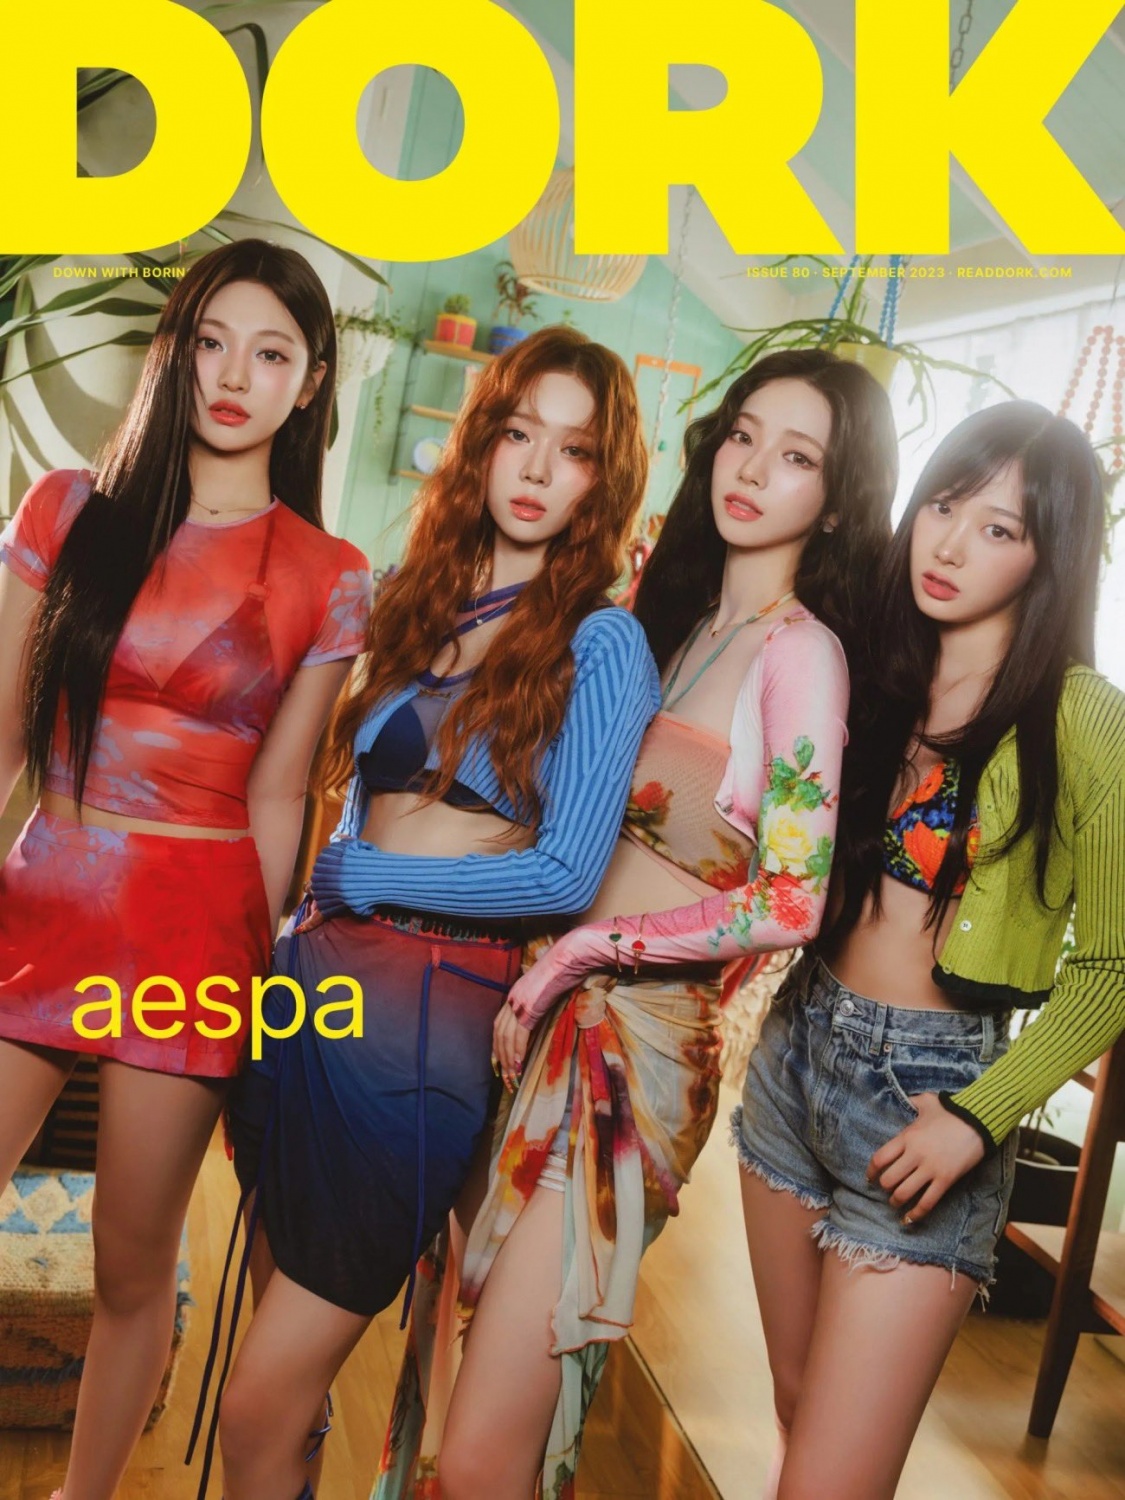 aespa, the first K-pop group to decorate the cover of a British magazine